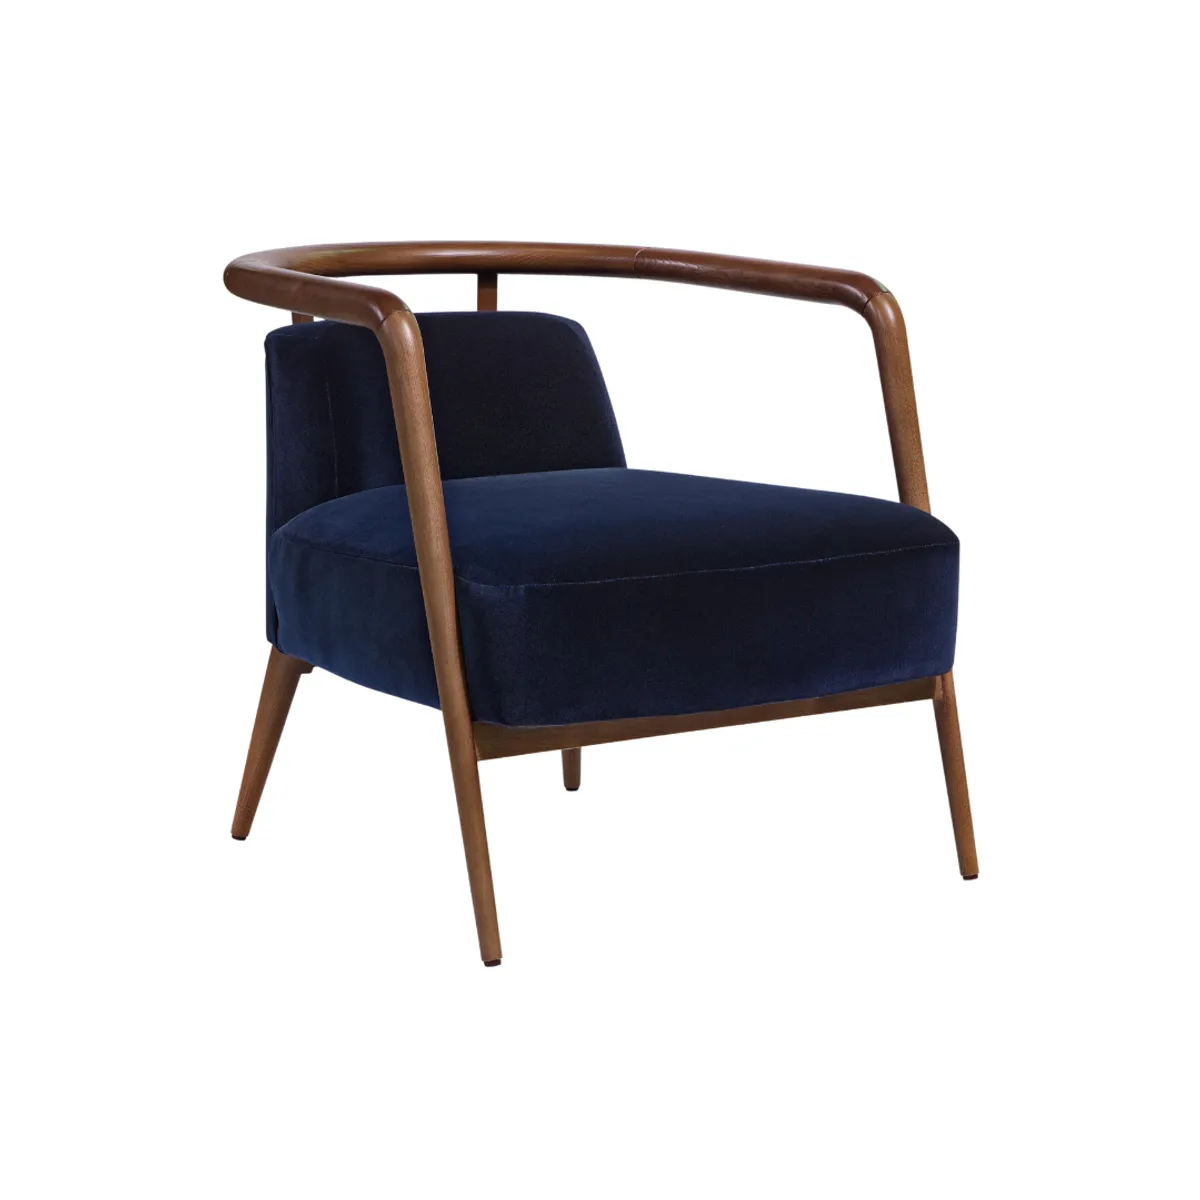 Delaney lounge chair 1